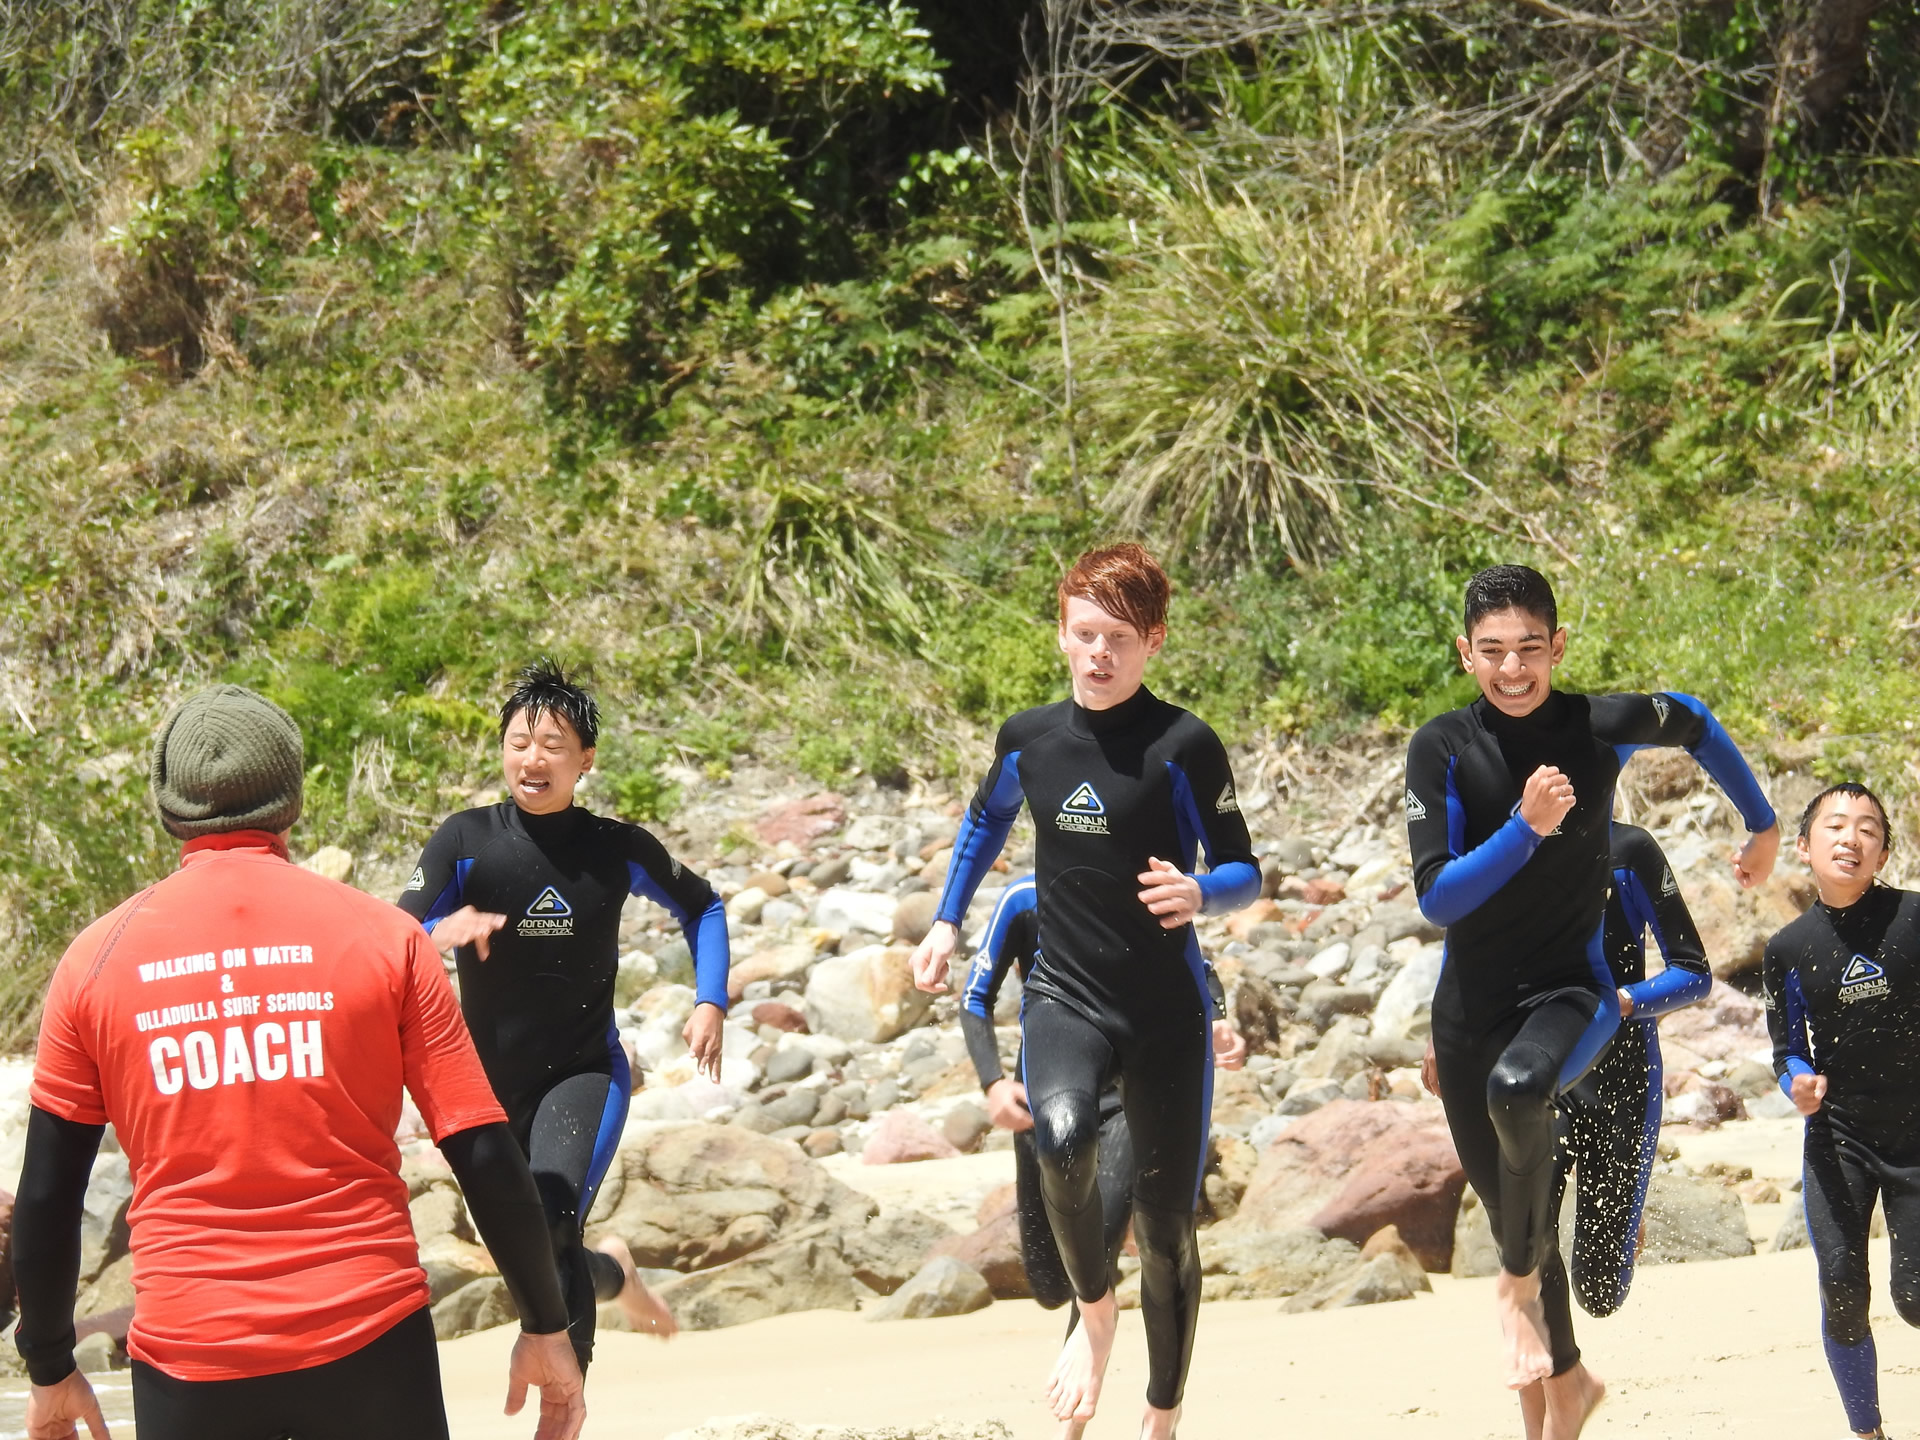 surf lessons and water safety course participants running on sand